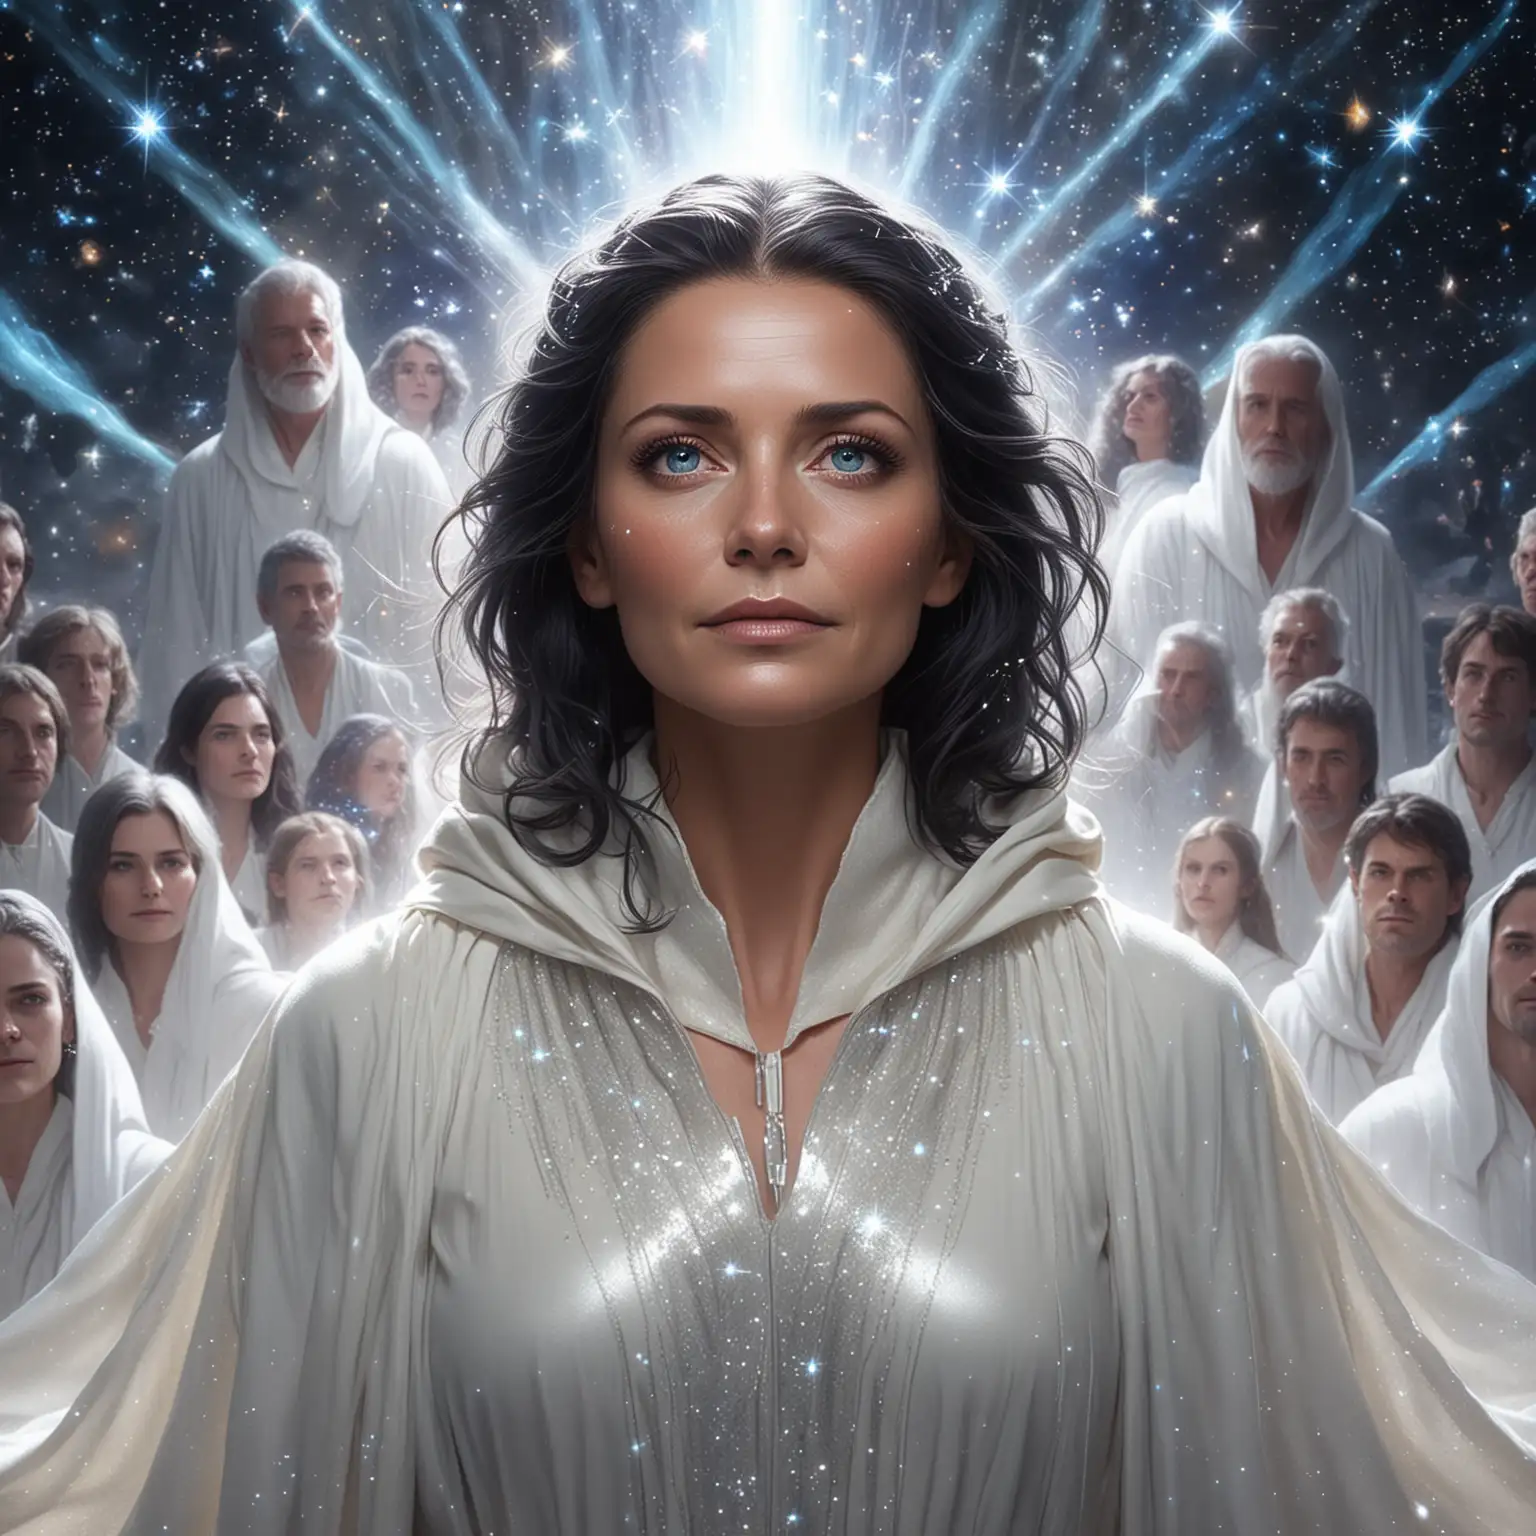 Galactic Mature Woman in Glowing White Robes Surrounded by Iridescent Figures